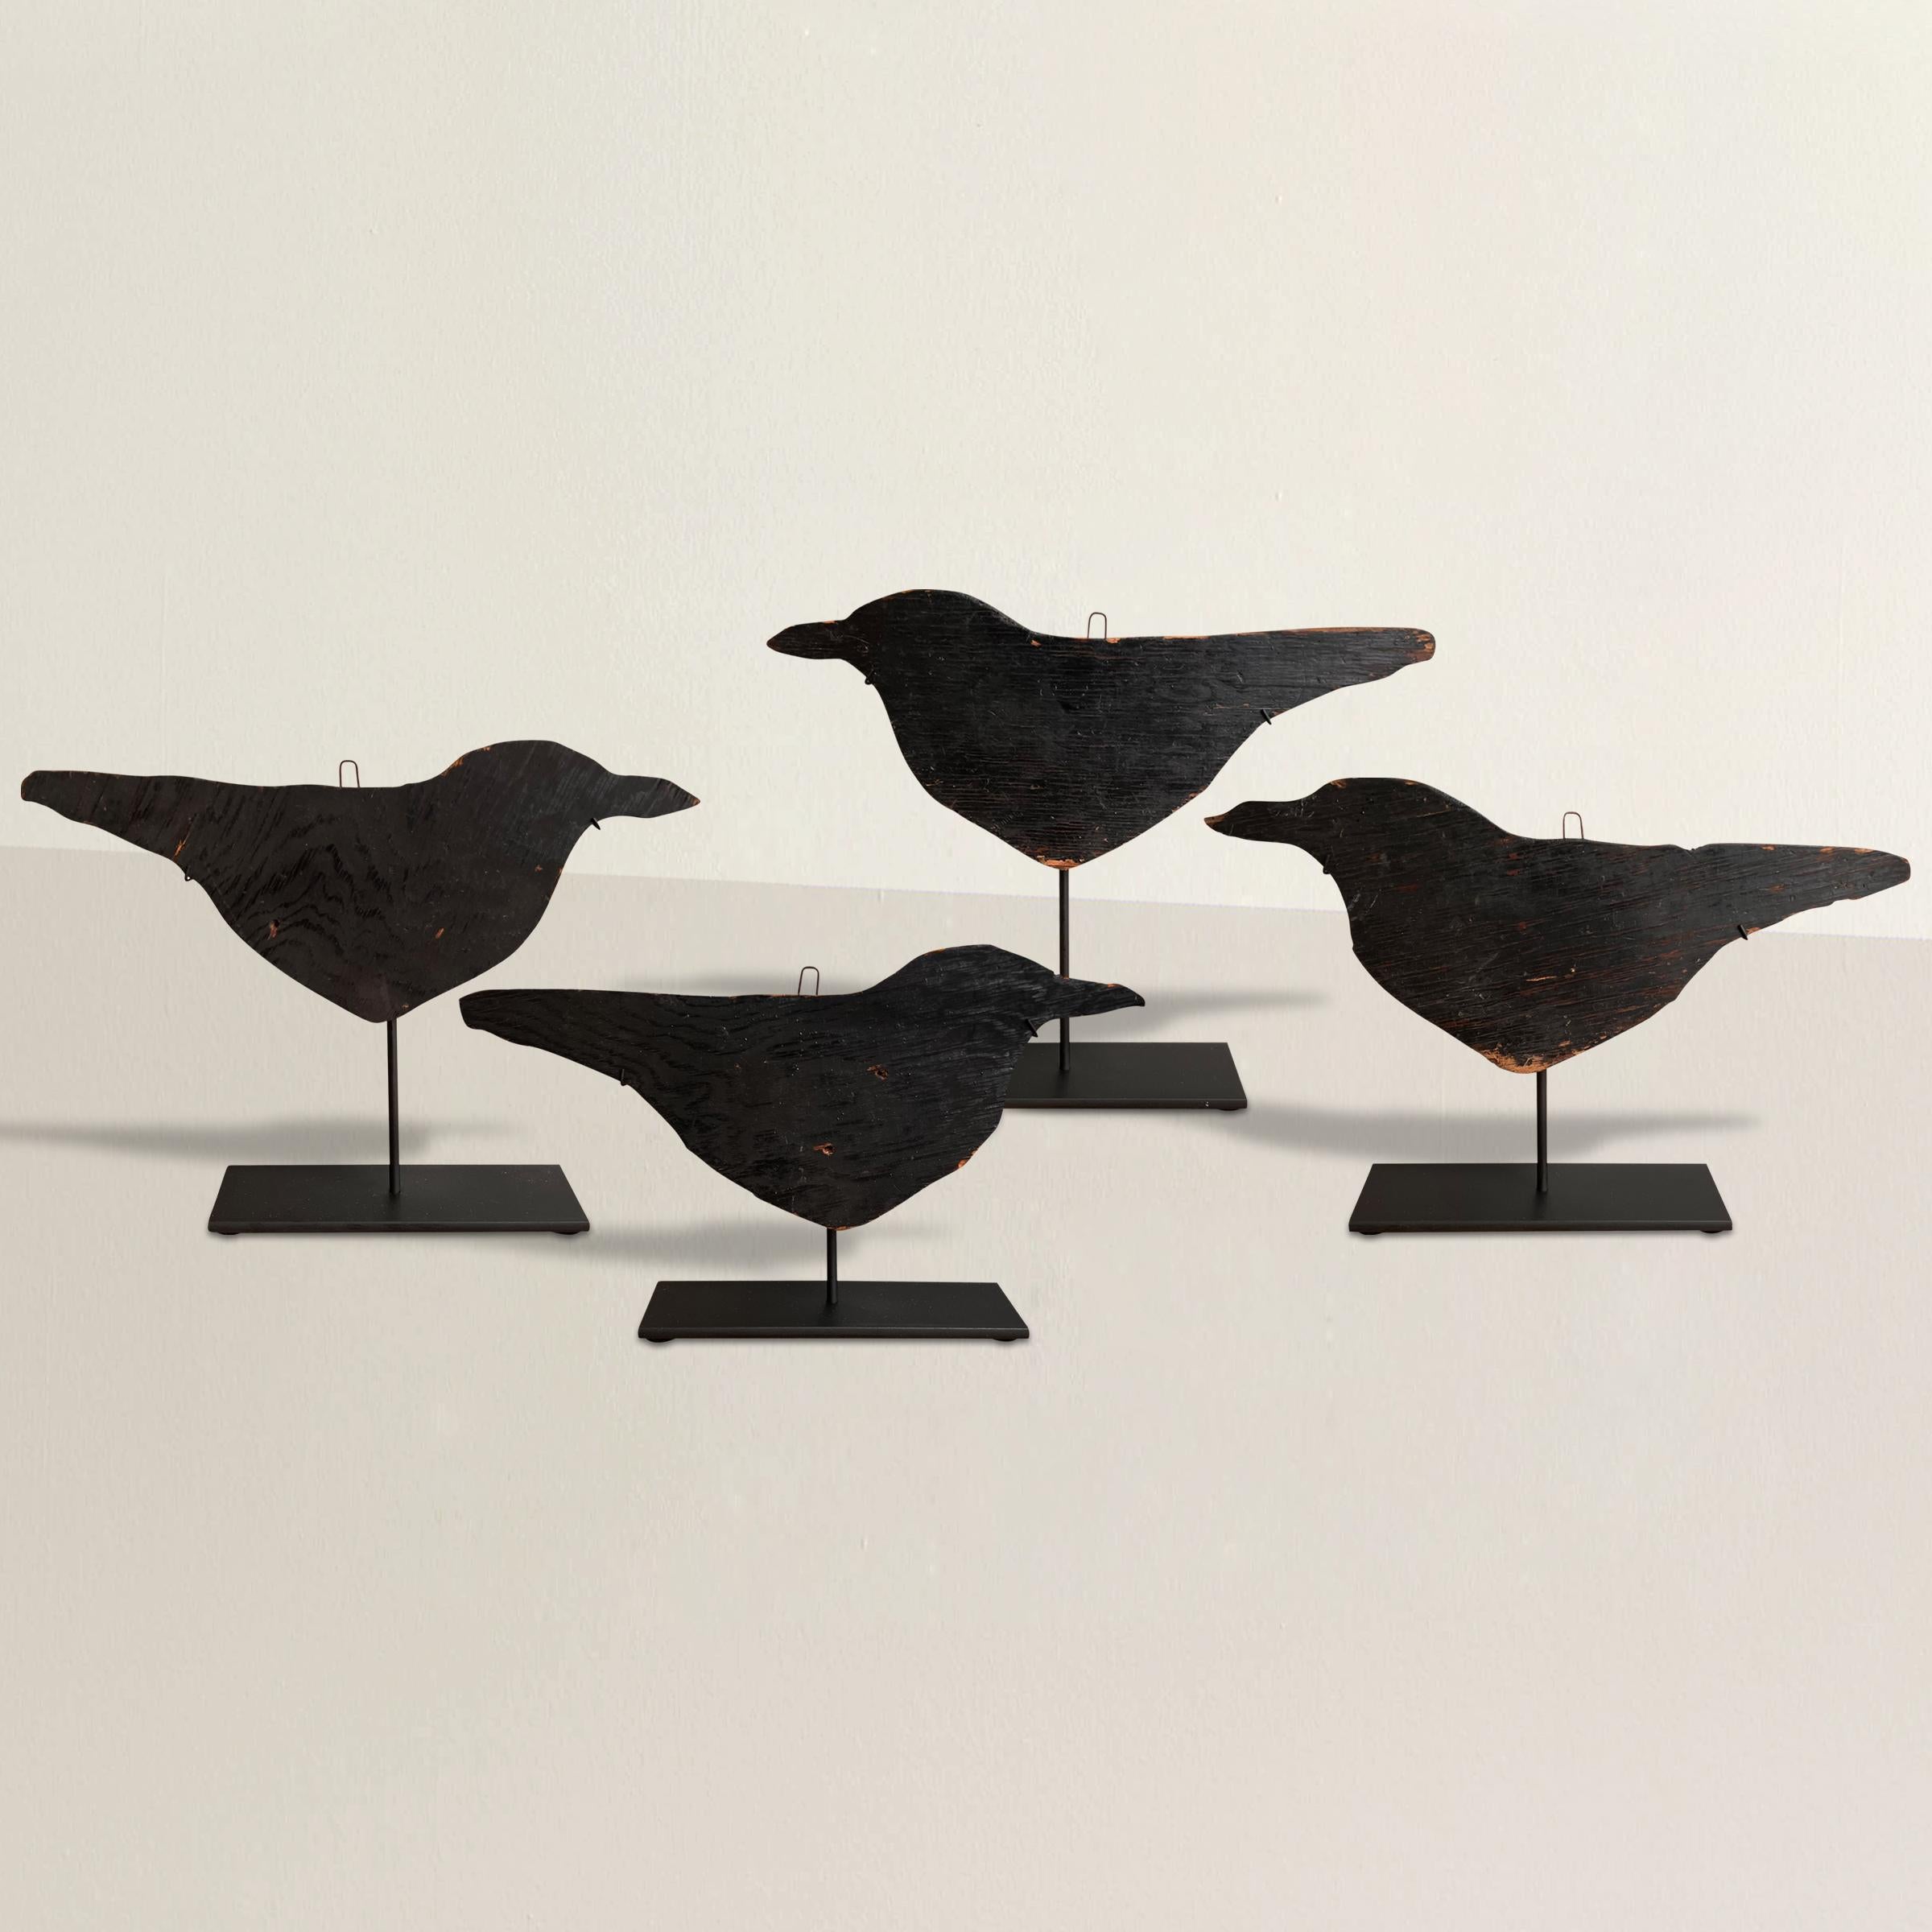 A charming murder of early 20th century American Folk Art crow decoys carved from plywood and painted black, and mounted on custom steel stands. Perfect decor for your country house, or Halloween decorations.